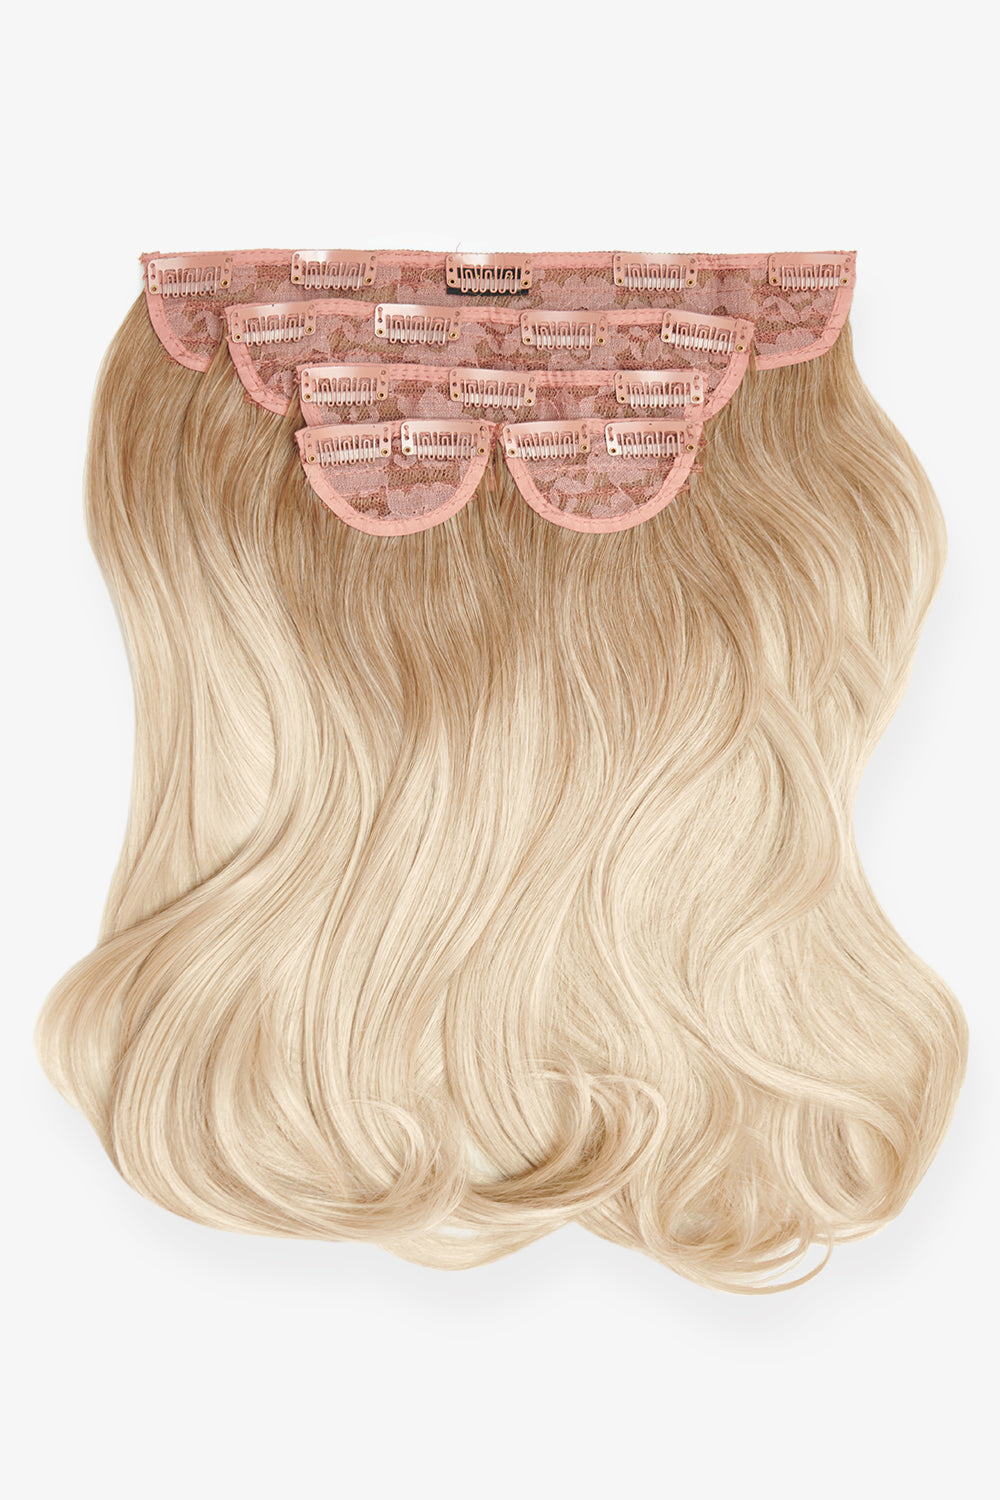 Super Thick 16" 5 Piece Blow Dry Wavy Clip In Hair Extensions - Rooted Light Blonde